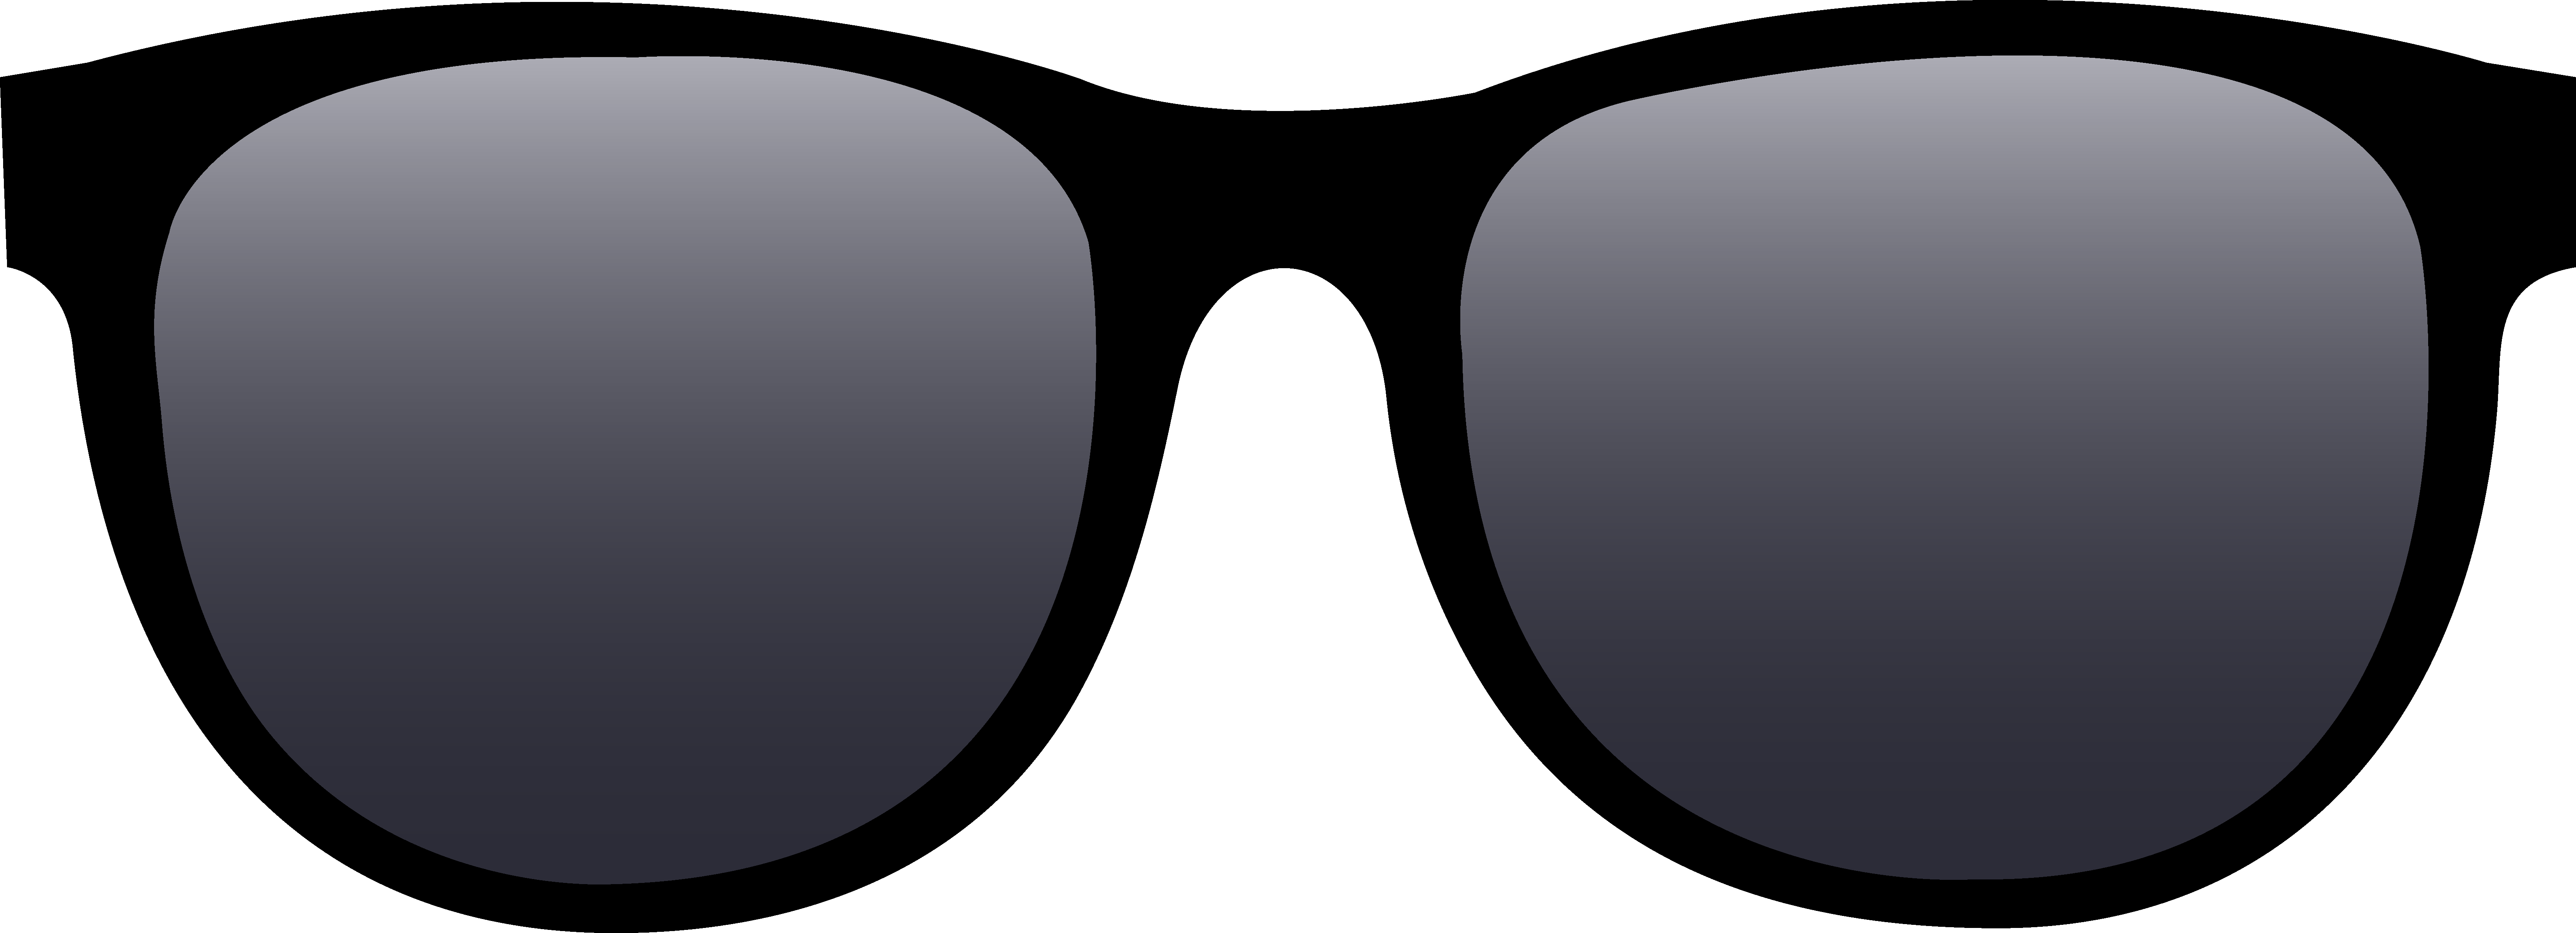 Free Black Glasses Cliparts Download Free Black Glasses Cliparts Png 